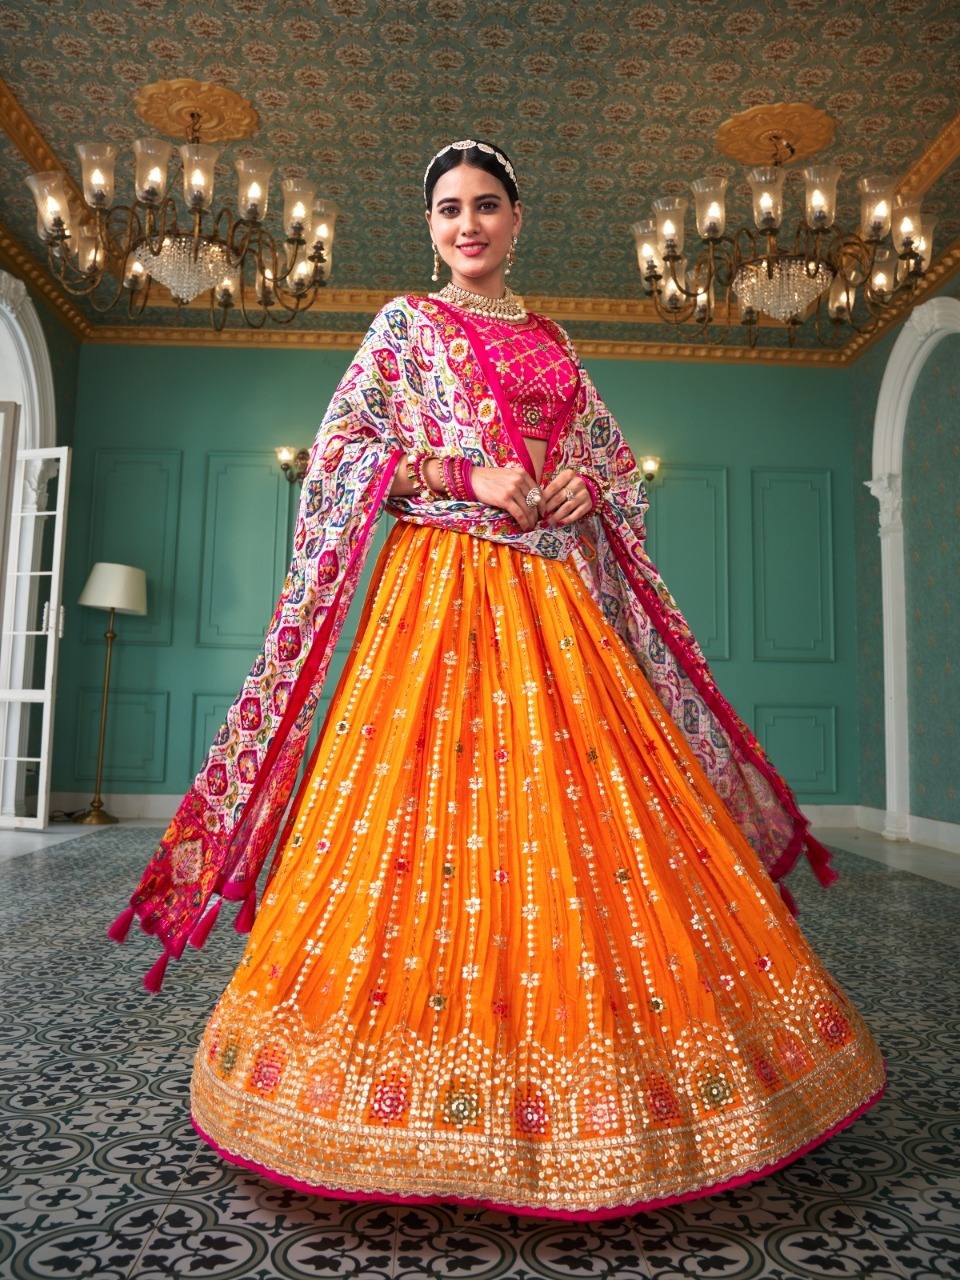 Lehenga Choli has been gracing the history of Indian fashion since the time  of the Maurya Empire. Watch the latest episode of Epic Digita... | Instagram